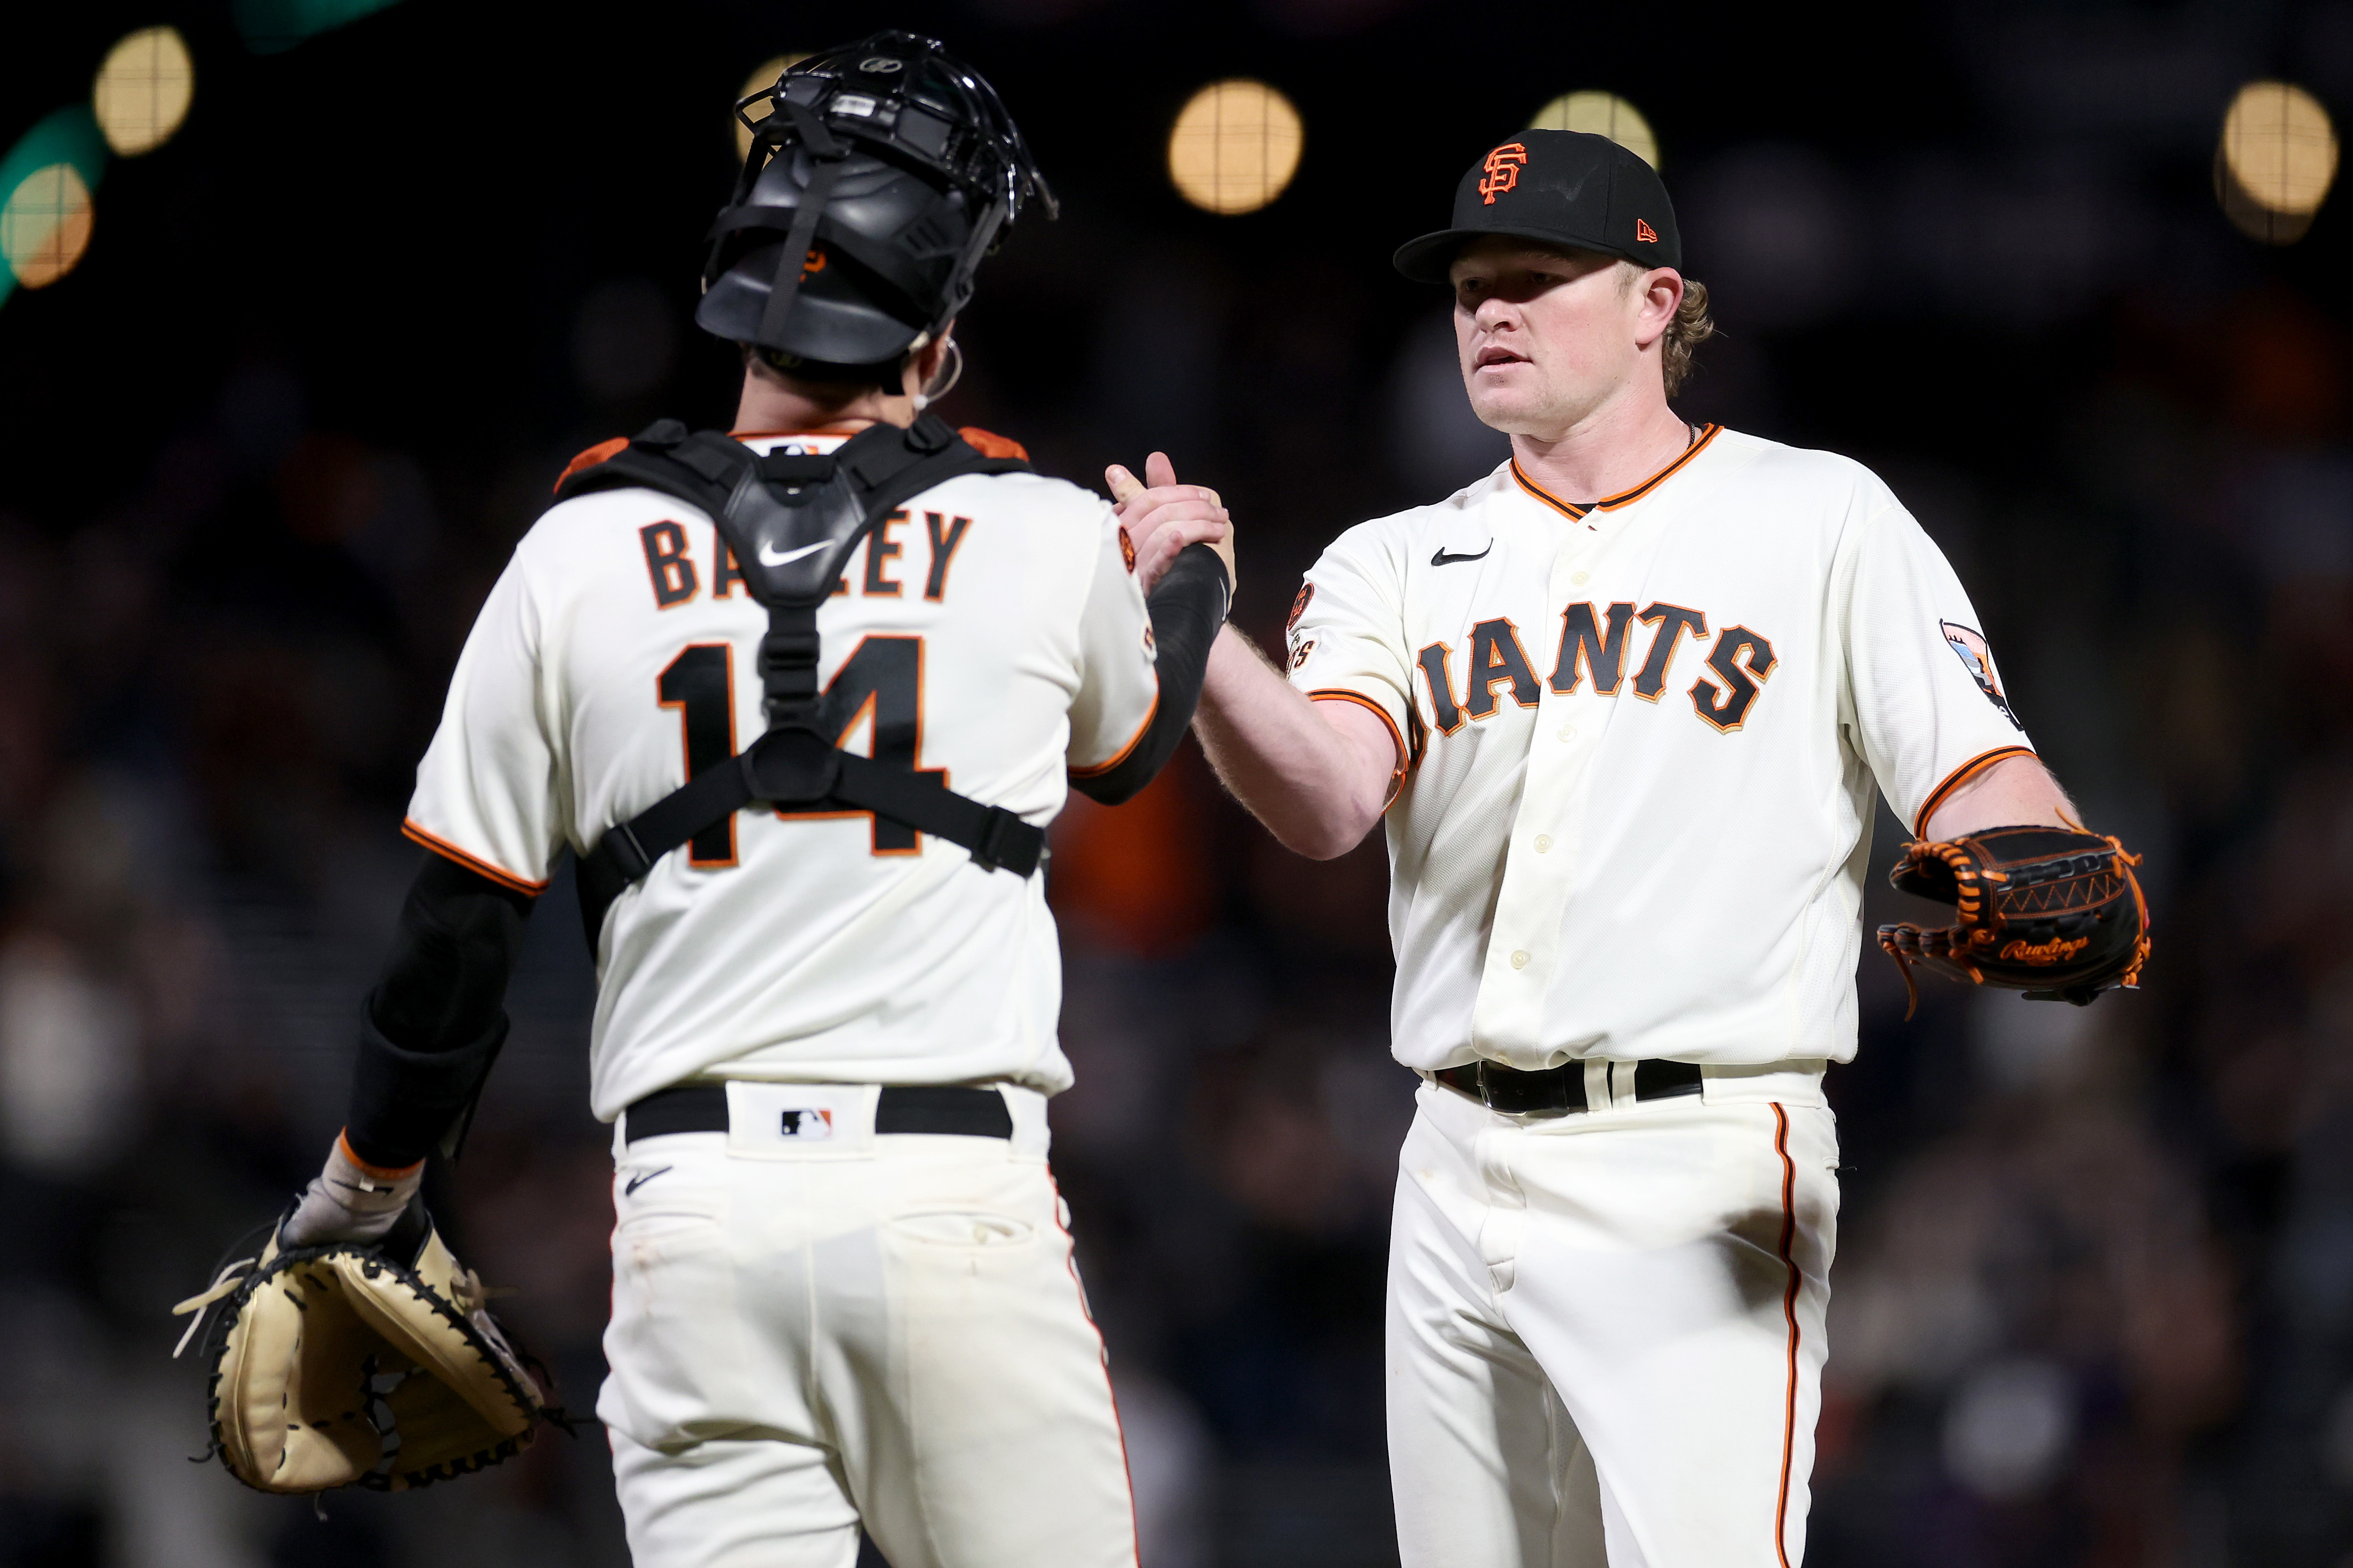 San Francisco Giants catcher Buster Posey hugs pitcher Brian Wilson after  they defeated the Philadelphia Phillies 3-2 in game 6 of the NLSC between  the San Francisco Giants and the Philadelphia Phillies